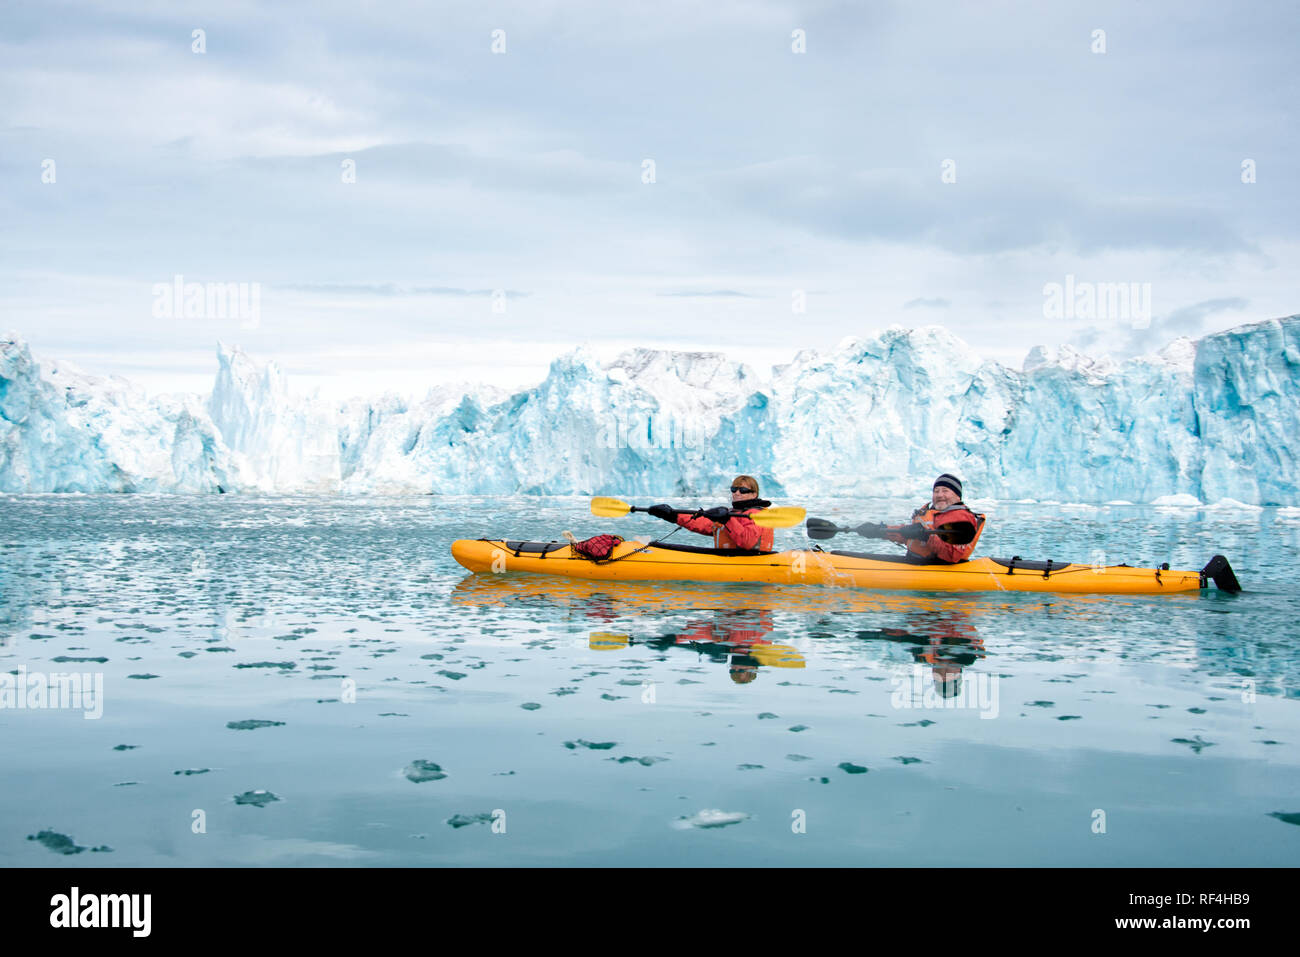 BRASVELLBREEN GLACIER, Svalbard — Kayakers navigate the icy waters near the Brasvellbreen glacier, one of the most impressive glaciers in the Svalbard archipelago. This unique kayaking experience offers visitors a close encounter with the Arctic landscape, highlighting the vast and awe-inspiring natural beauty of the region. Stock Photo